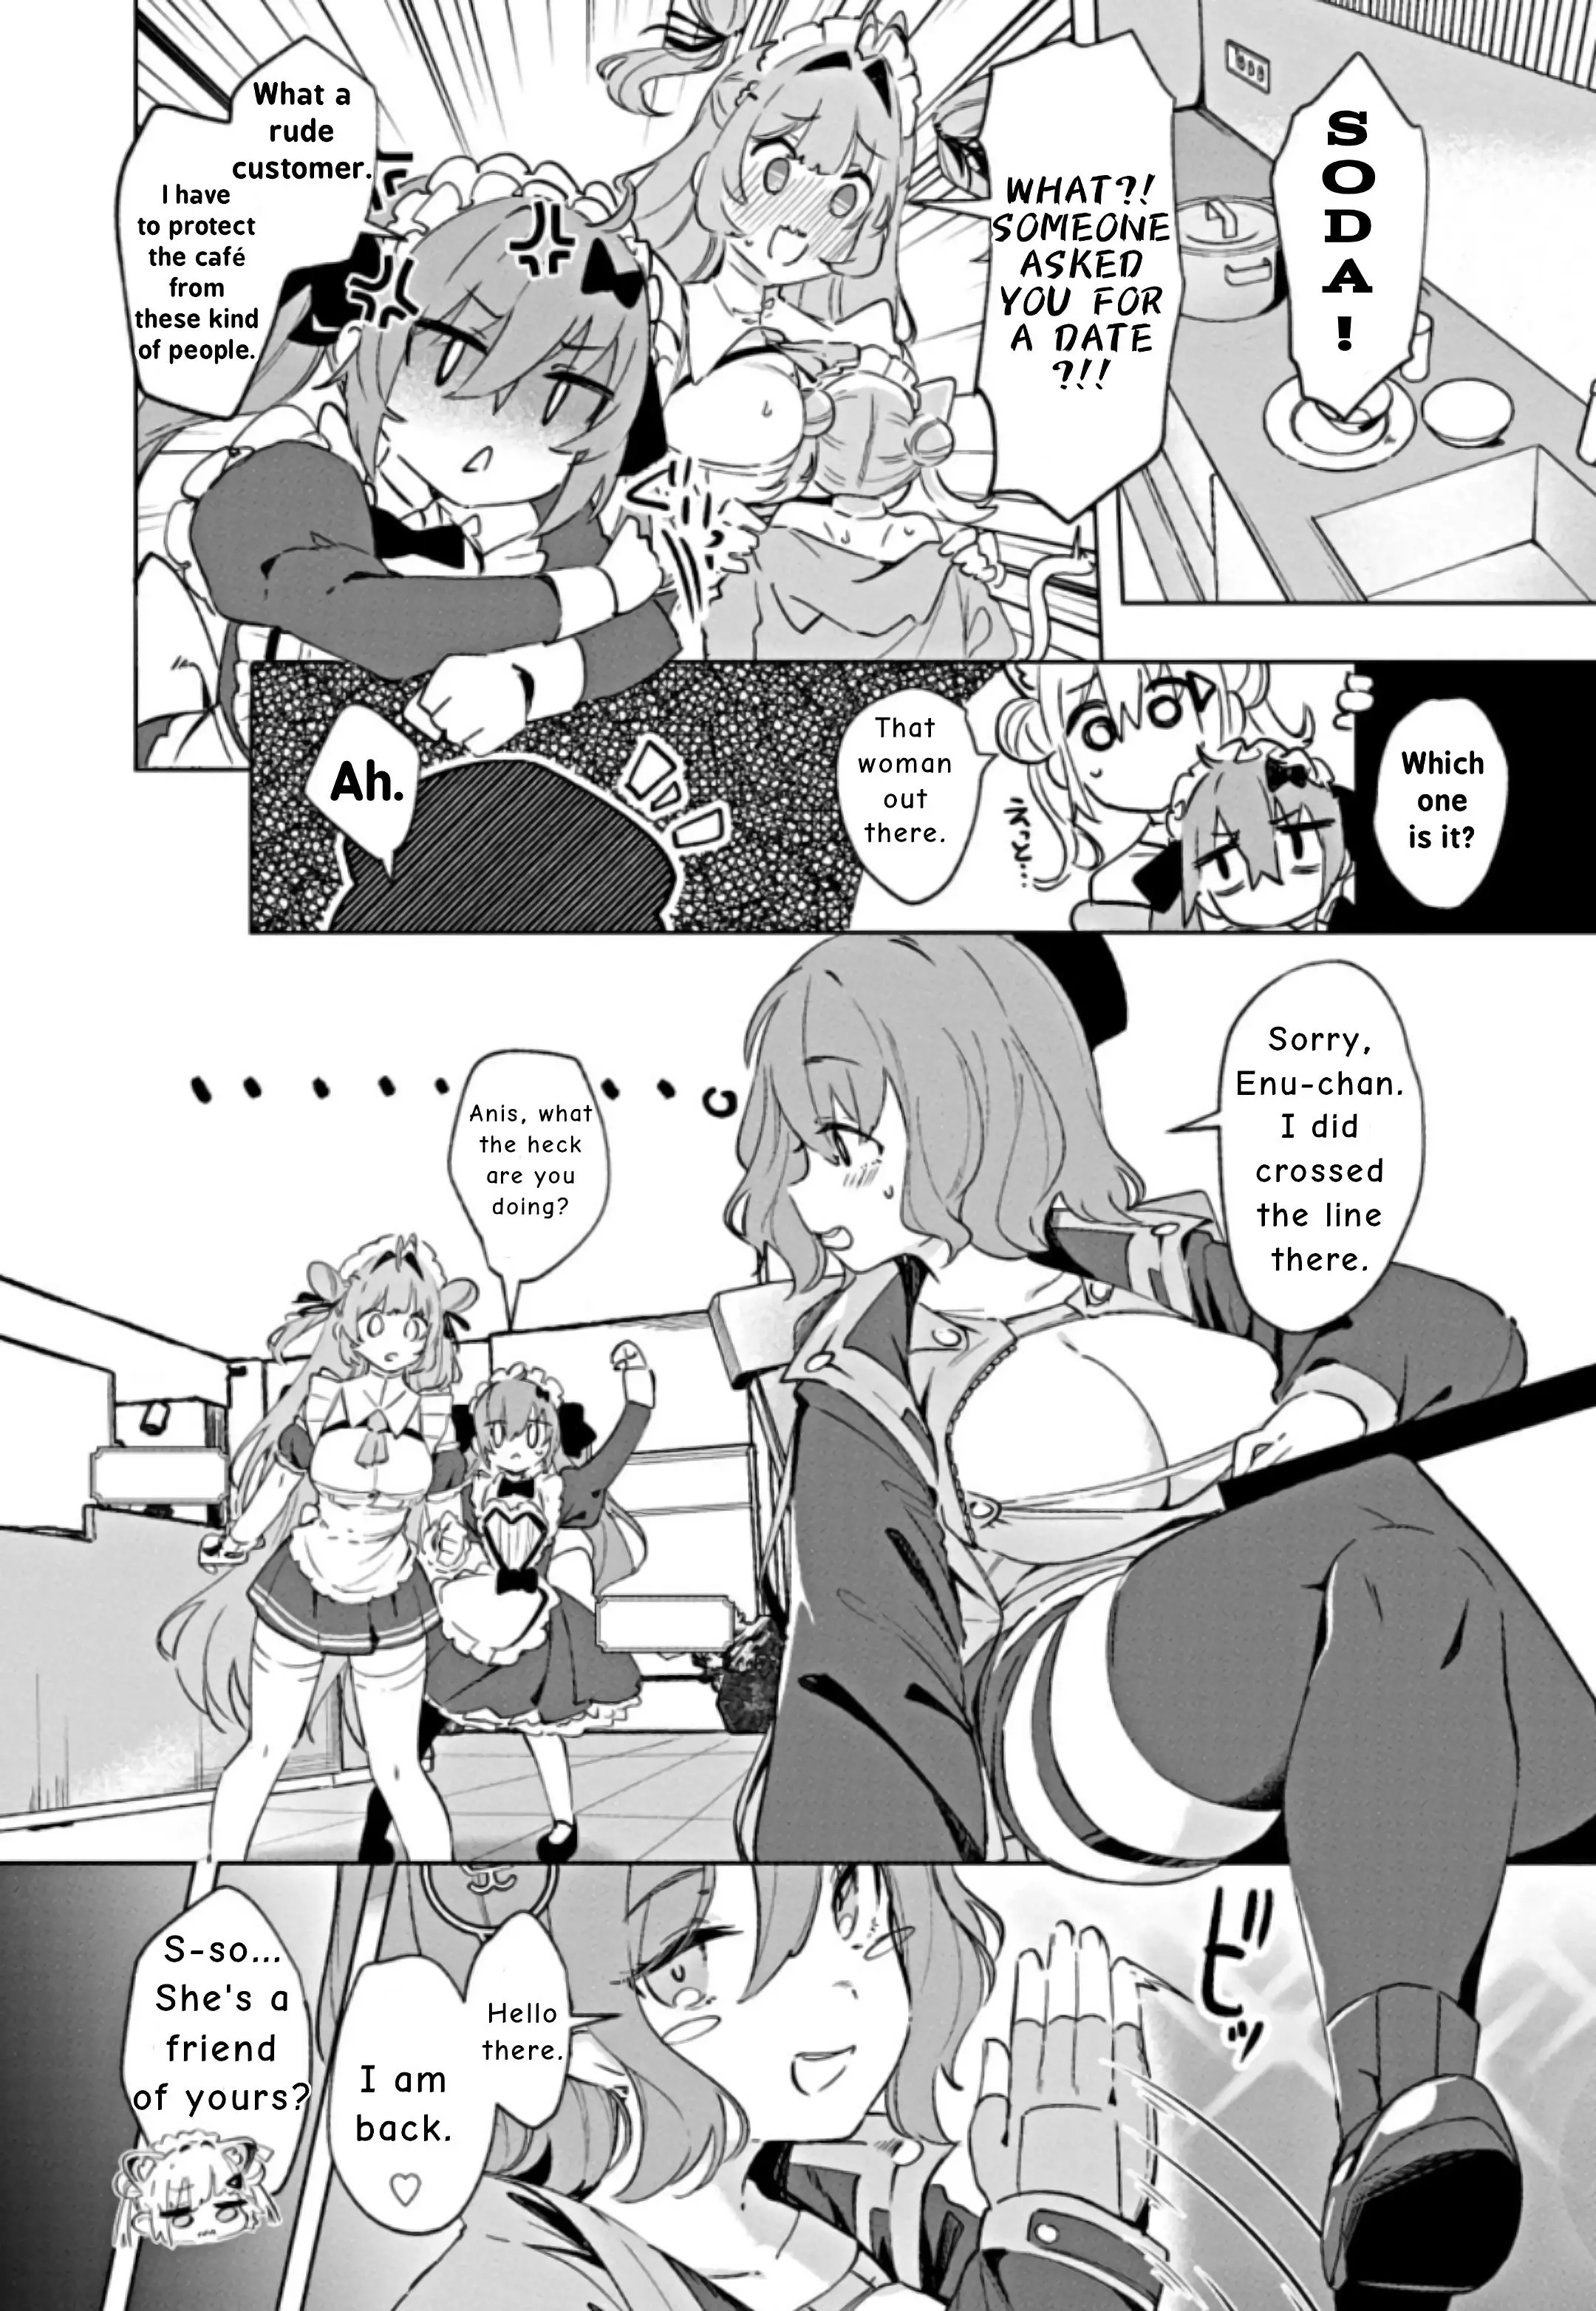 Goddess Of Victory: Nikke - Sweet Encount - 3 page 6-1233d496